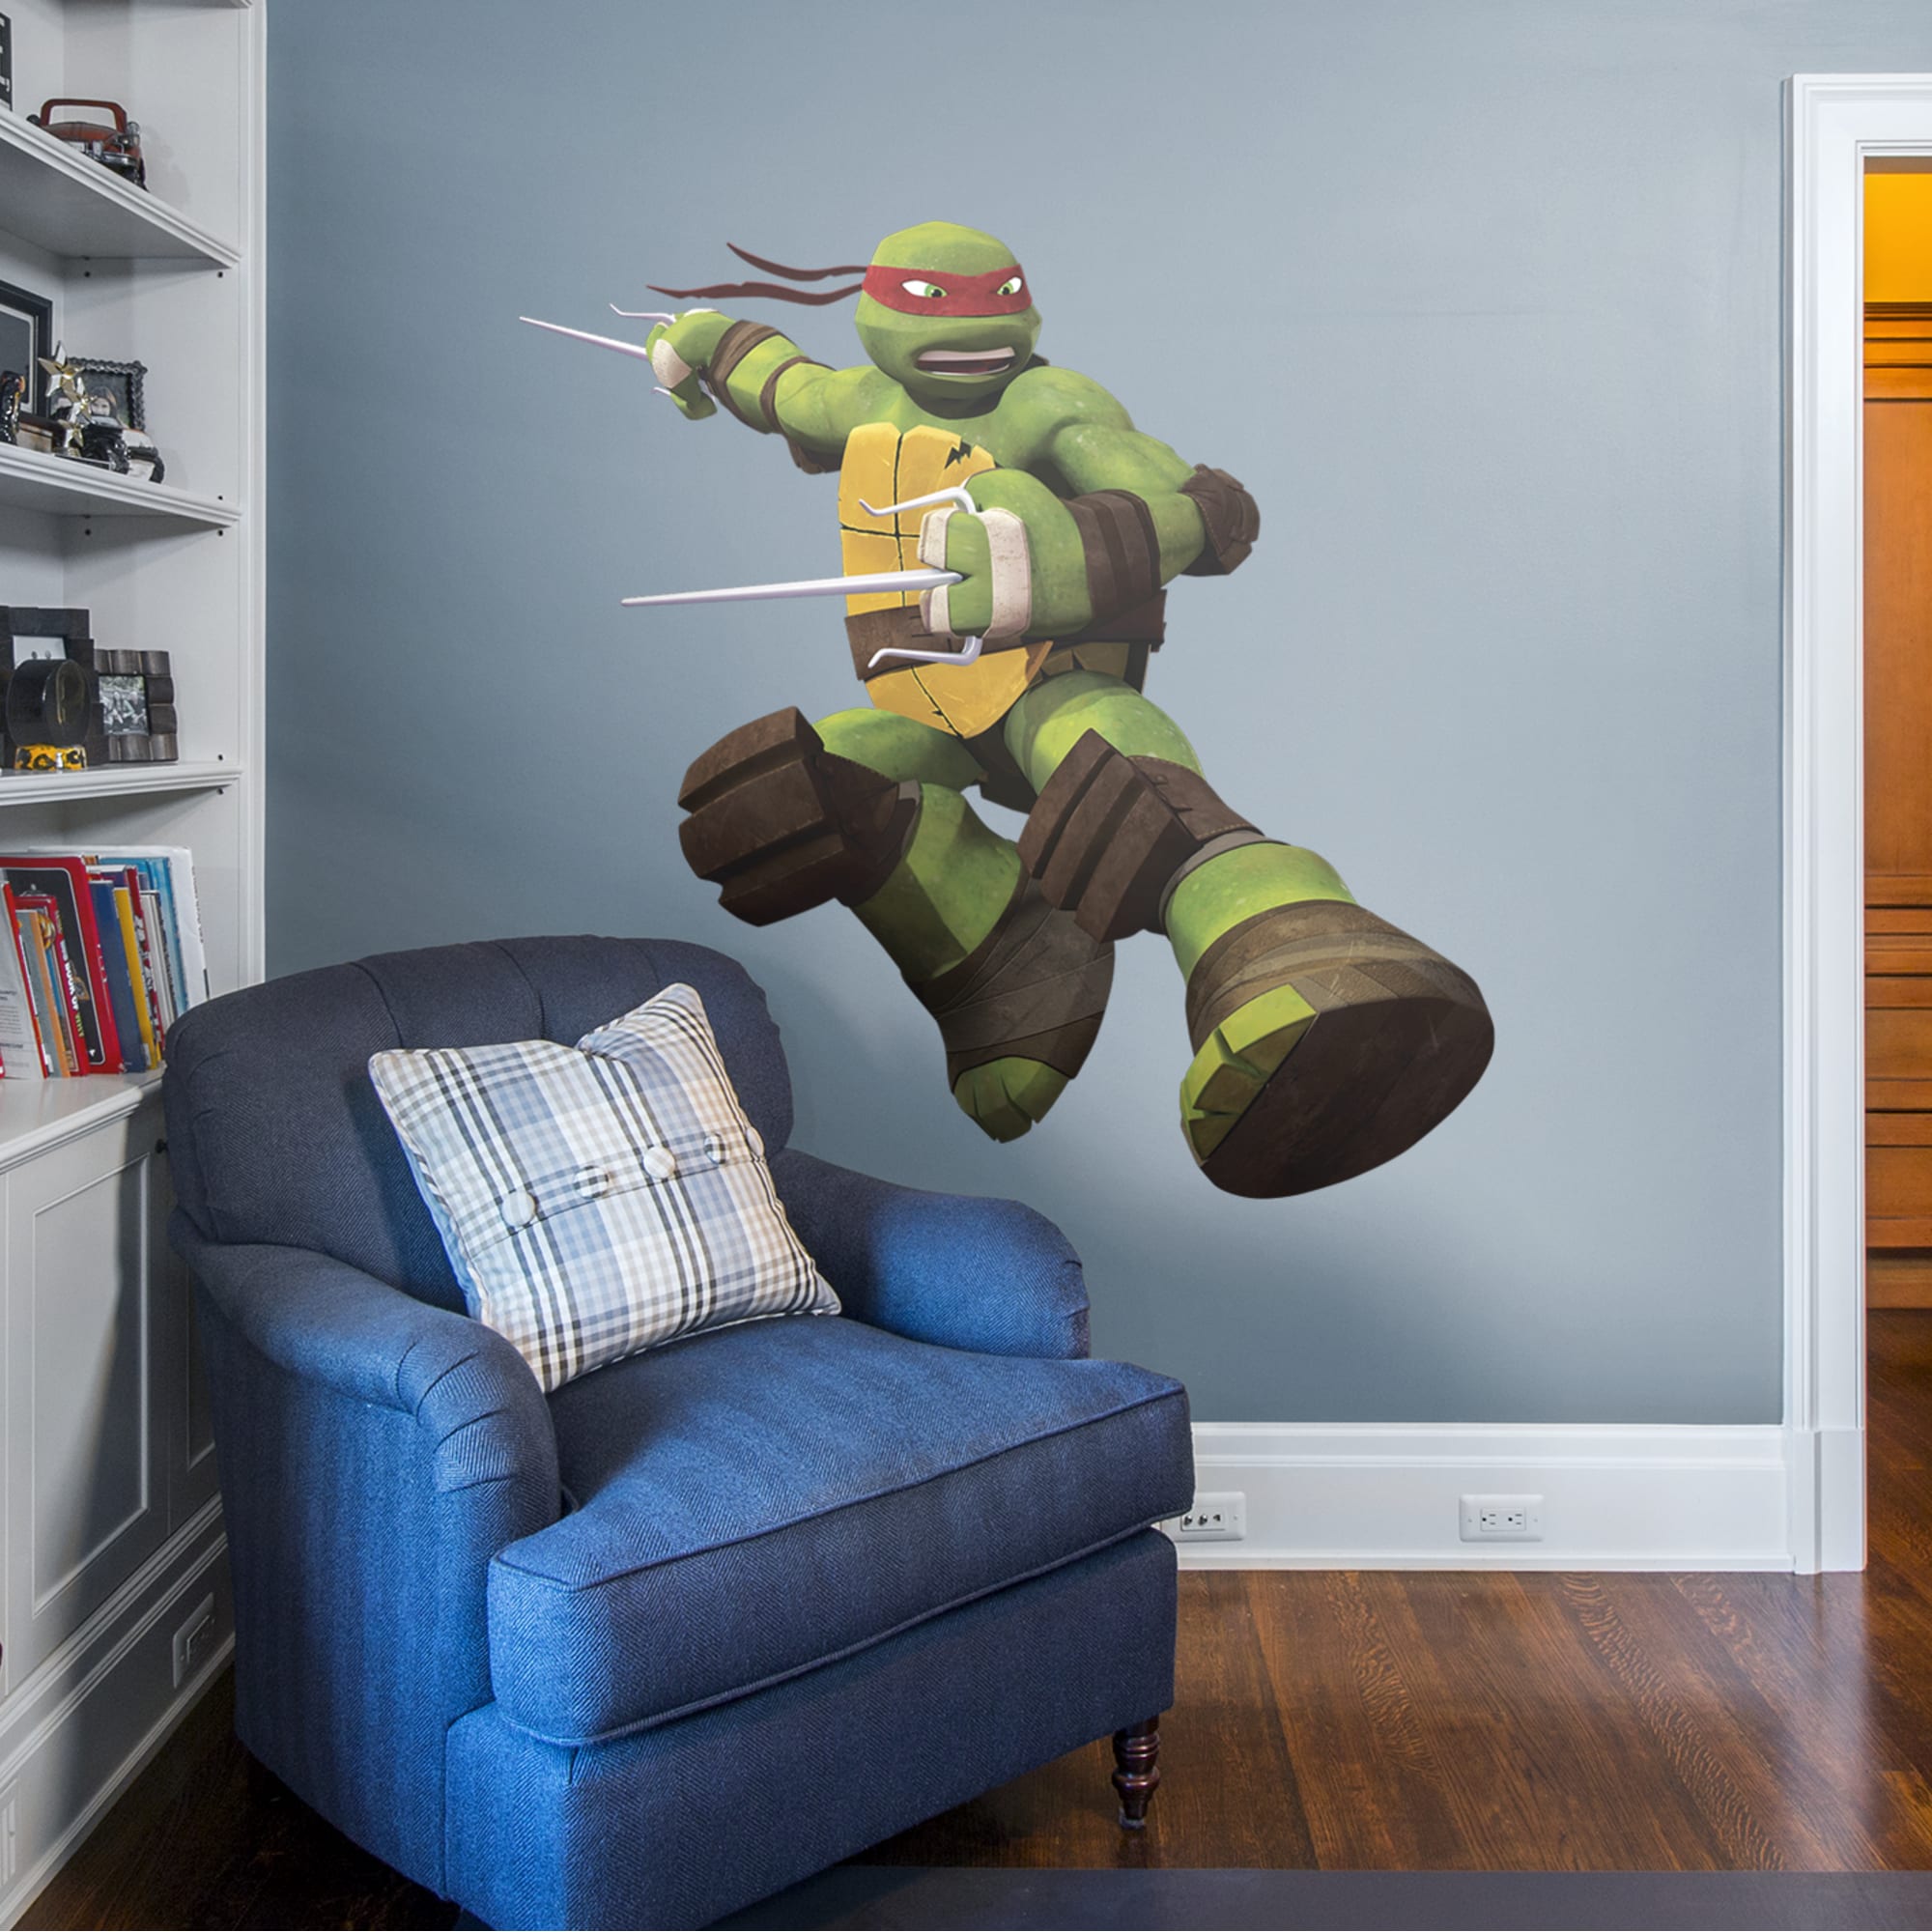 Raphael - Officially Licensed Removable Wall Decal 64.0"W x 53.0"H by Fathead | Vinyl